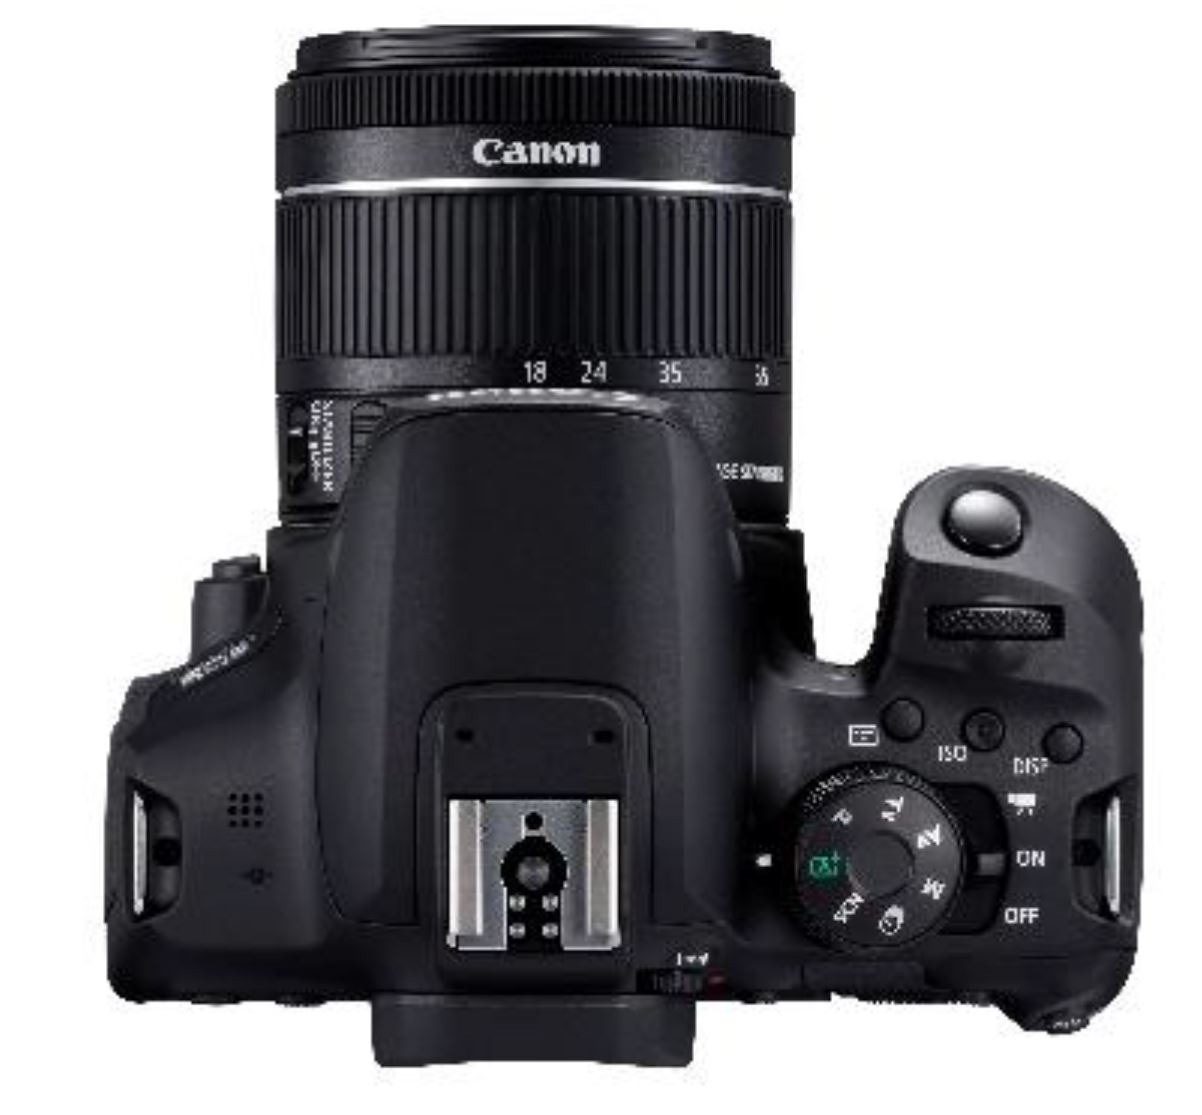 district Ape nickel Here is the Canon EOS Rebel 850D/T8i | Canon Rumors - Your best source for  Canon rumors, leaks and gossip